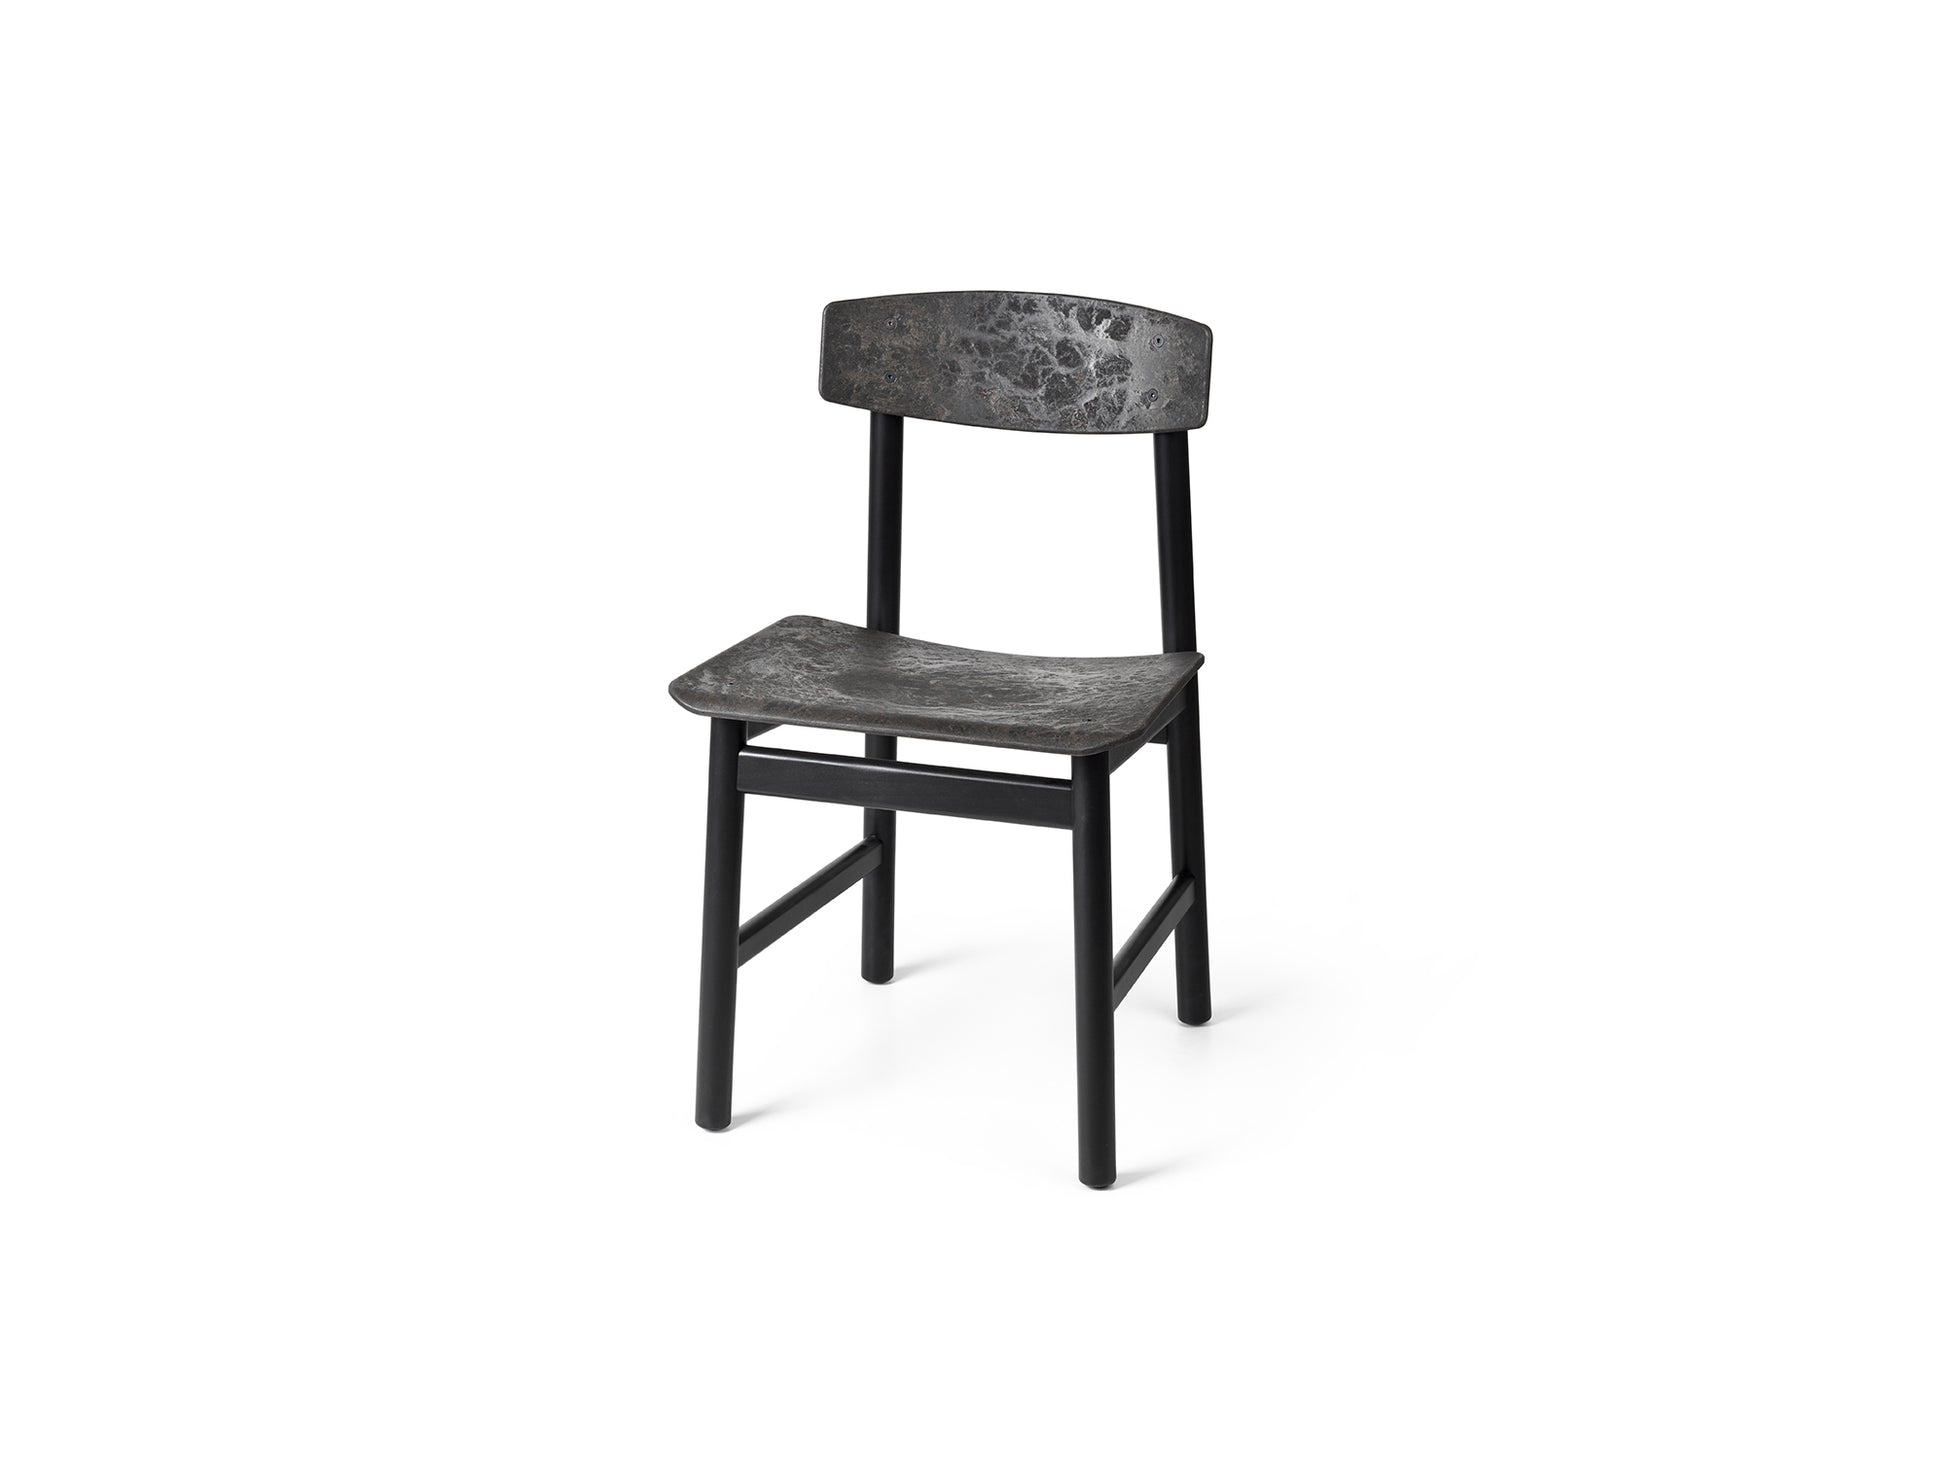 Conscious Chair 3162 by Mater - Black Painted Beech / Coffee Waste Black